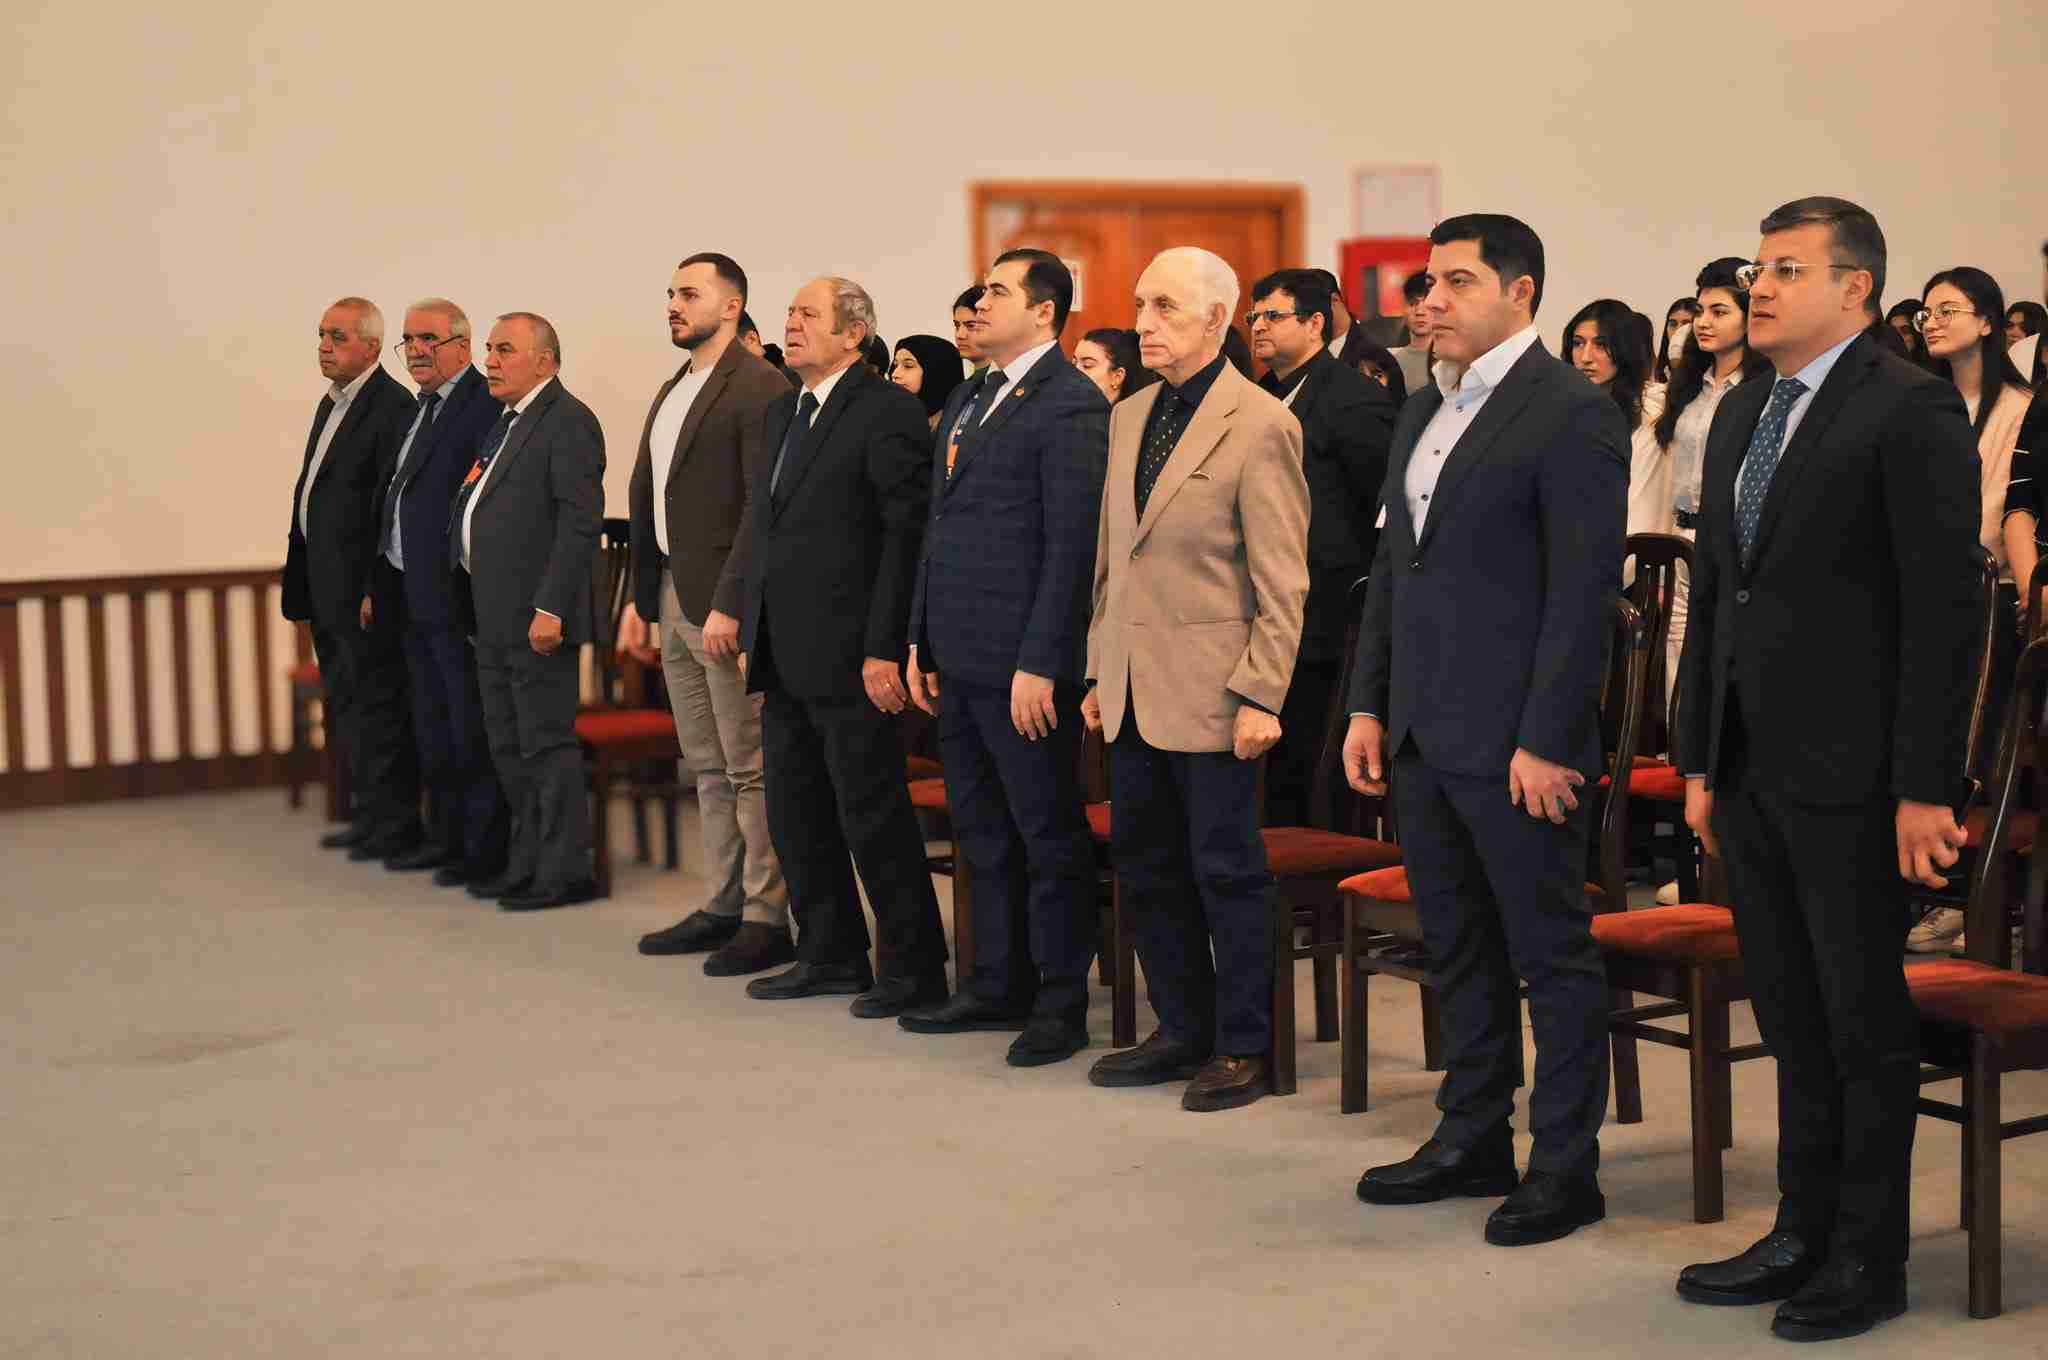 A conference dedicated to "March 31 Genocide Day of Azerbaijanis" was held at OYU